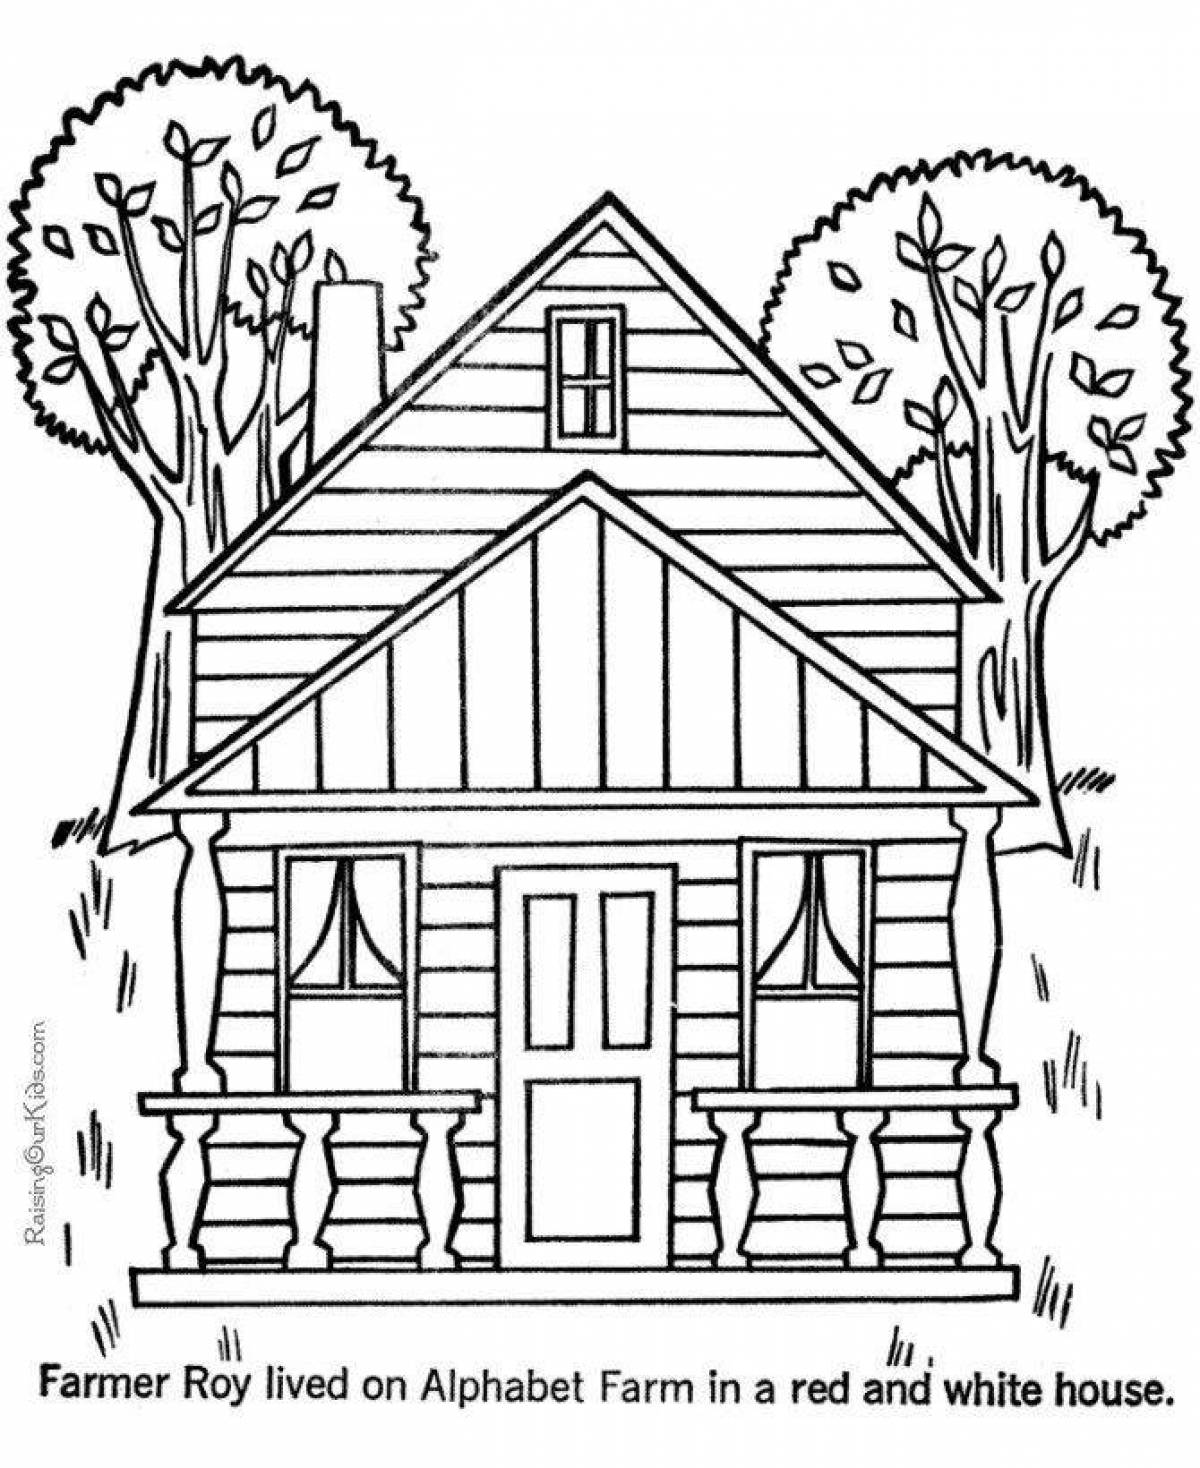 Shiny house coloring for kids